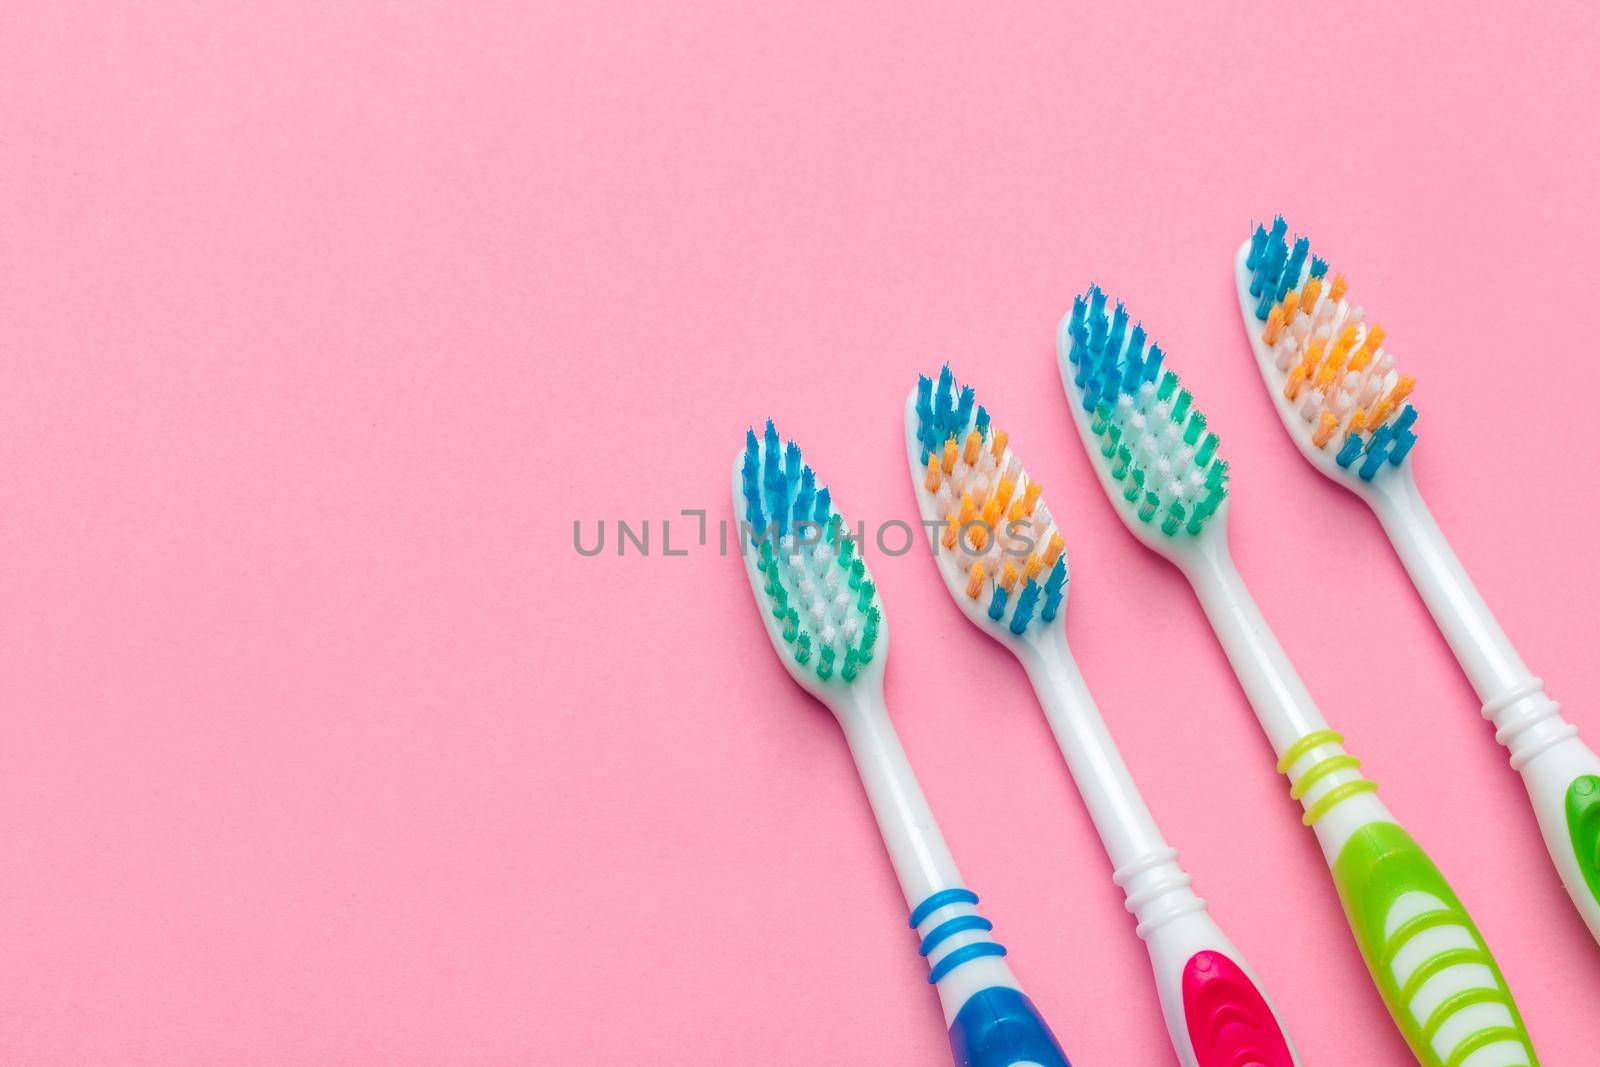 Toothbrushes on pink background. creative photo.